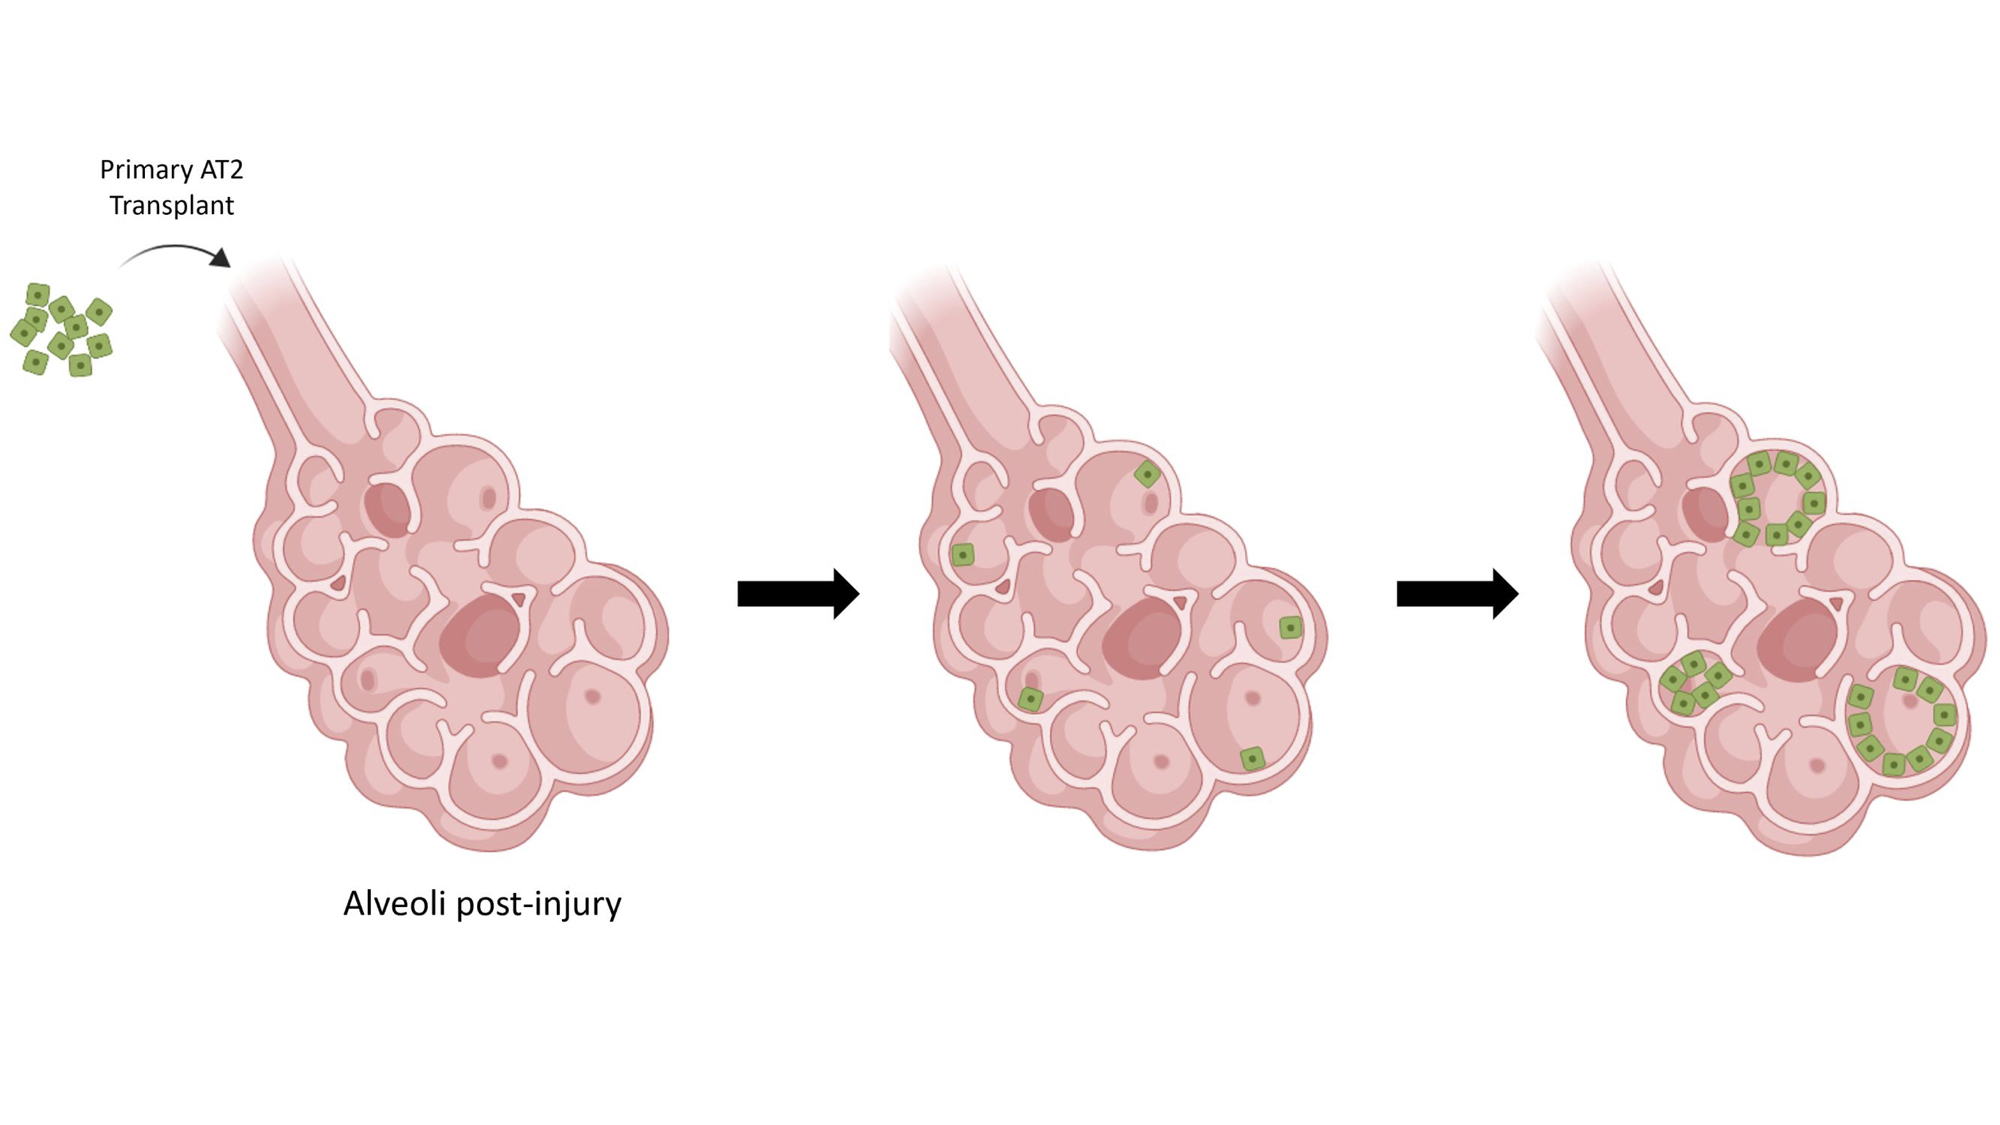 A cartoon depicts the lung's alveoli in three stages. The first shows a primary AT2 cell transplant in an alveoli post-injury, the second image shows green transplanted AT2 cells in the alveoli, and the third image shows the green cells reproducing inside the alveoli